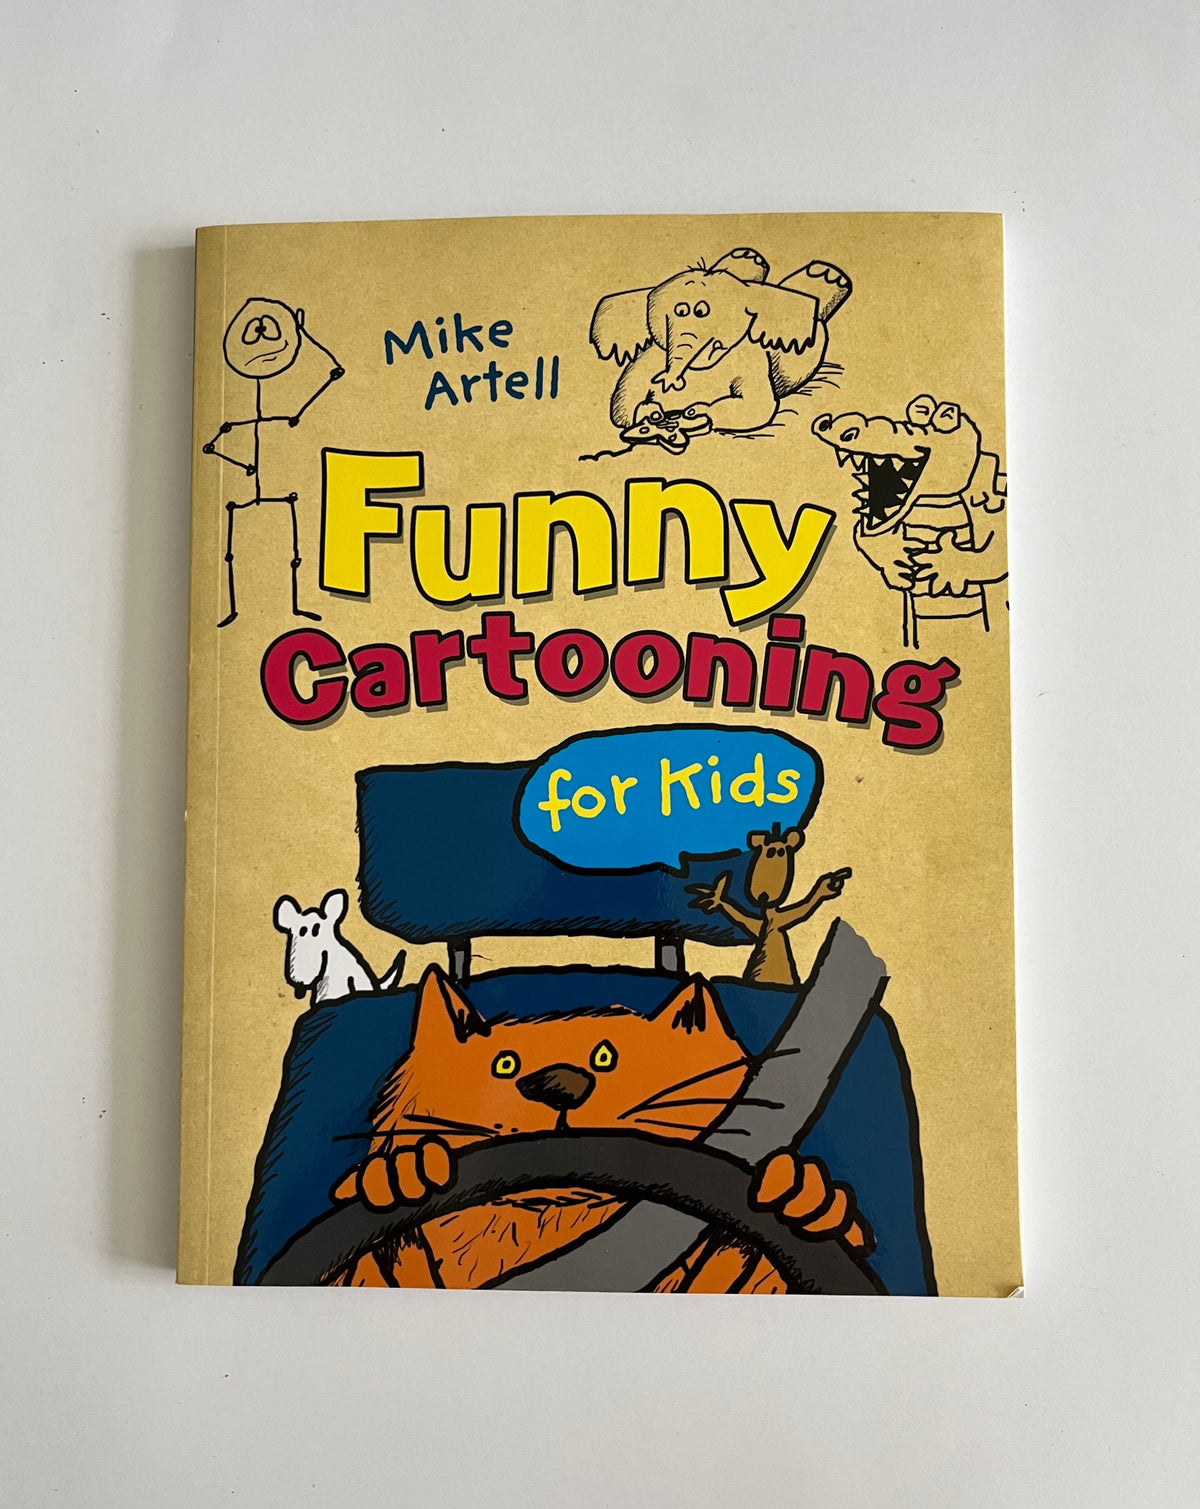 Funny Cartooning for Kids by Mike Artell